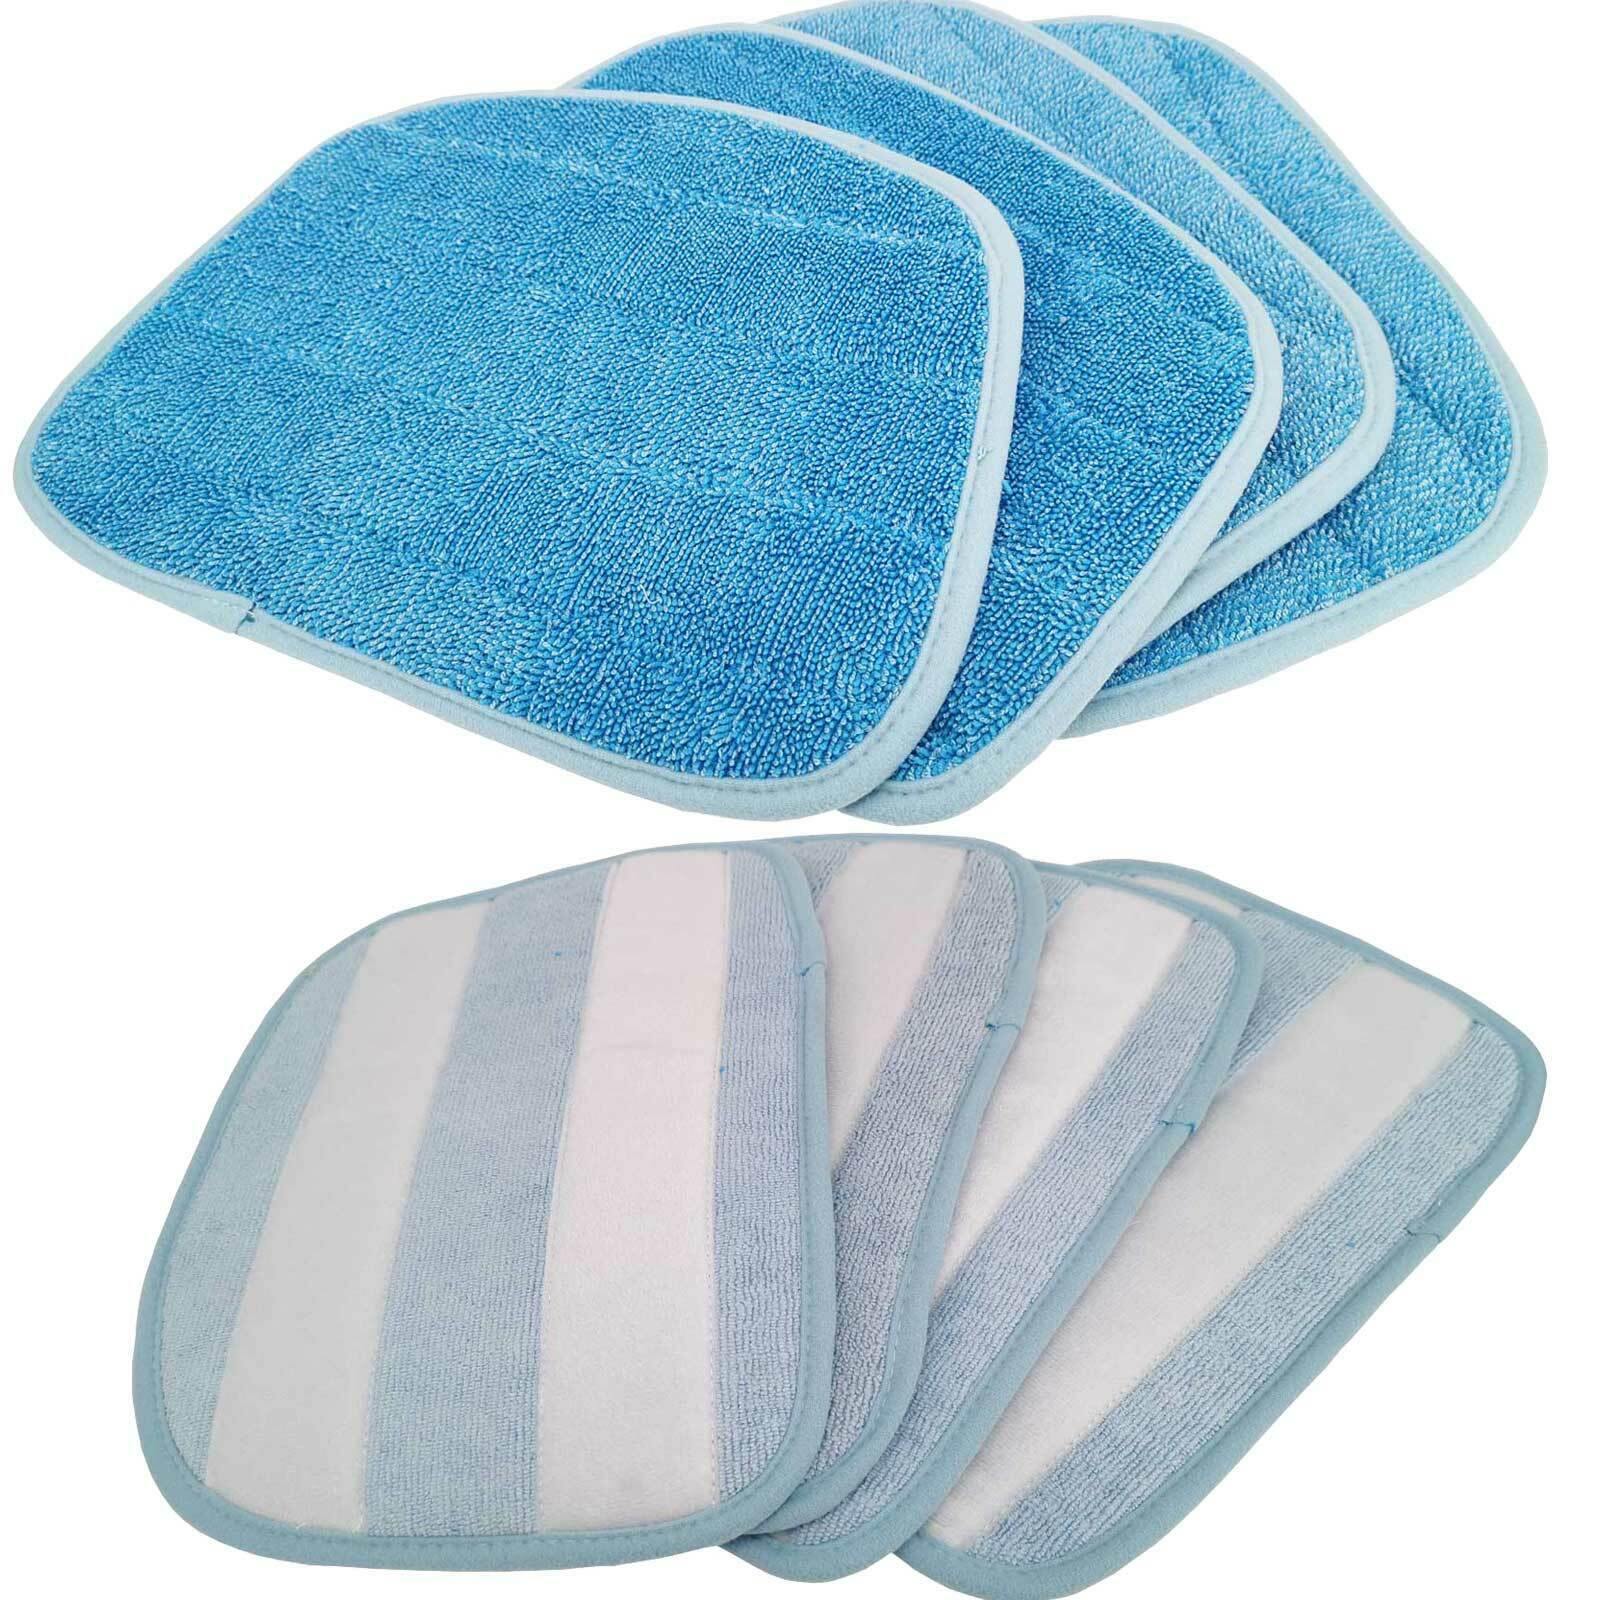 Blue Steam Mop Cleaning Triangle Pads Microfibre Washable For Vax Hoover Sparesbarn